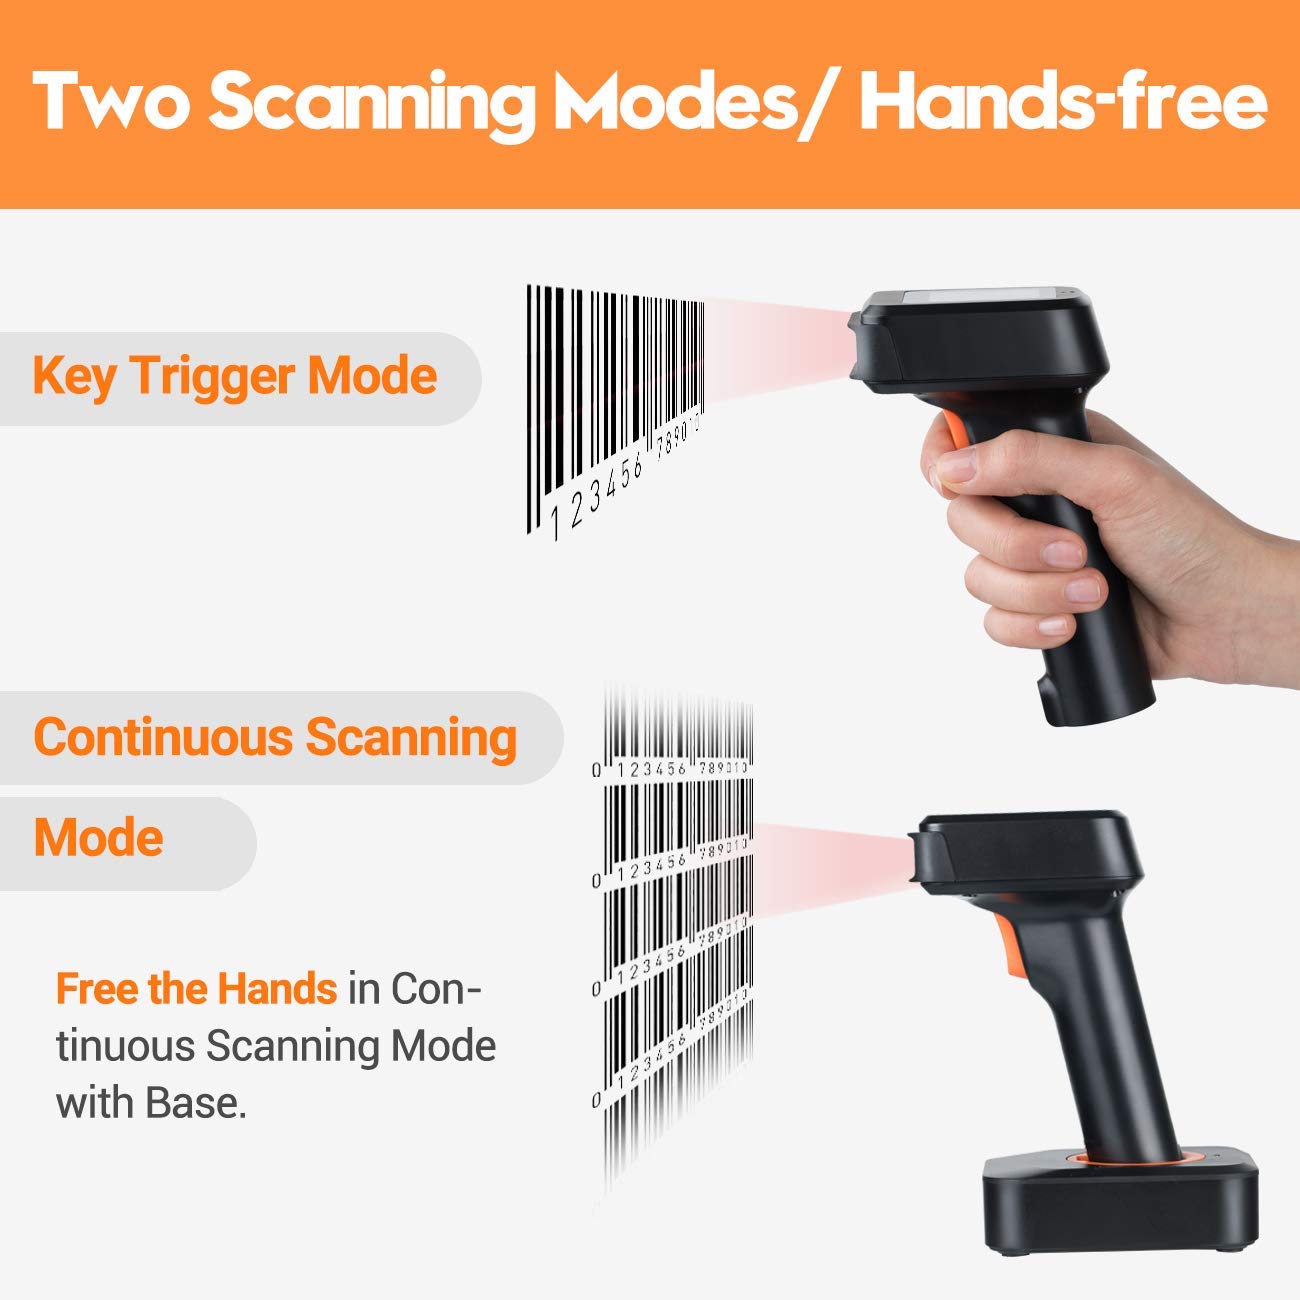 tera-hw0006pro-2d-wireless-barcode-scanner-with-display-screen-handsfree-scanning-modes